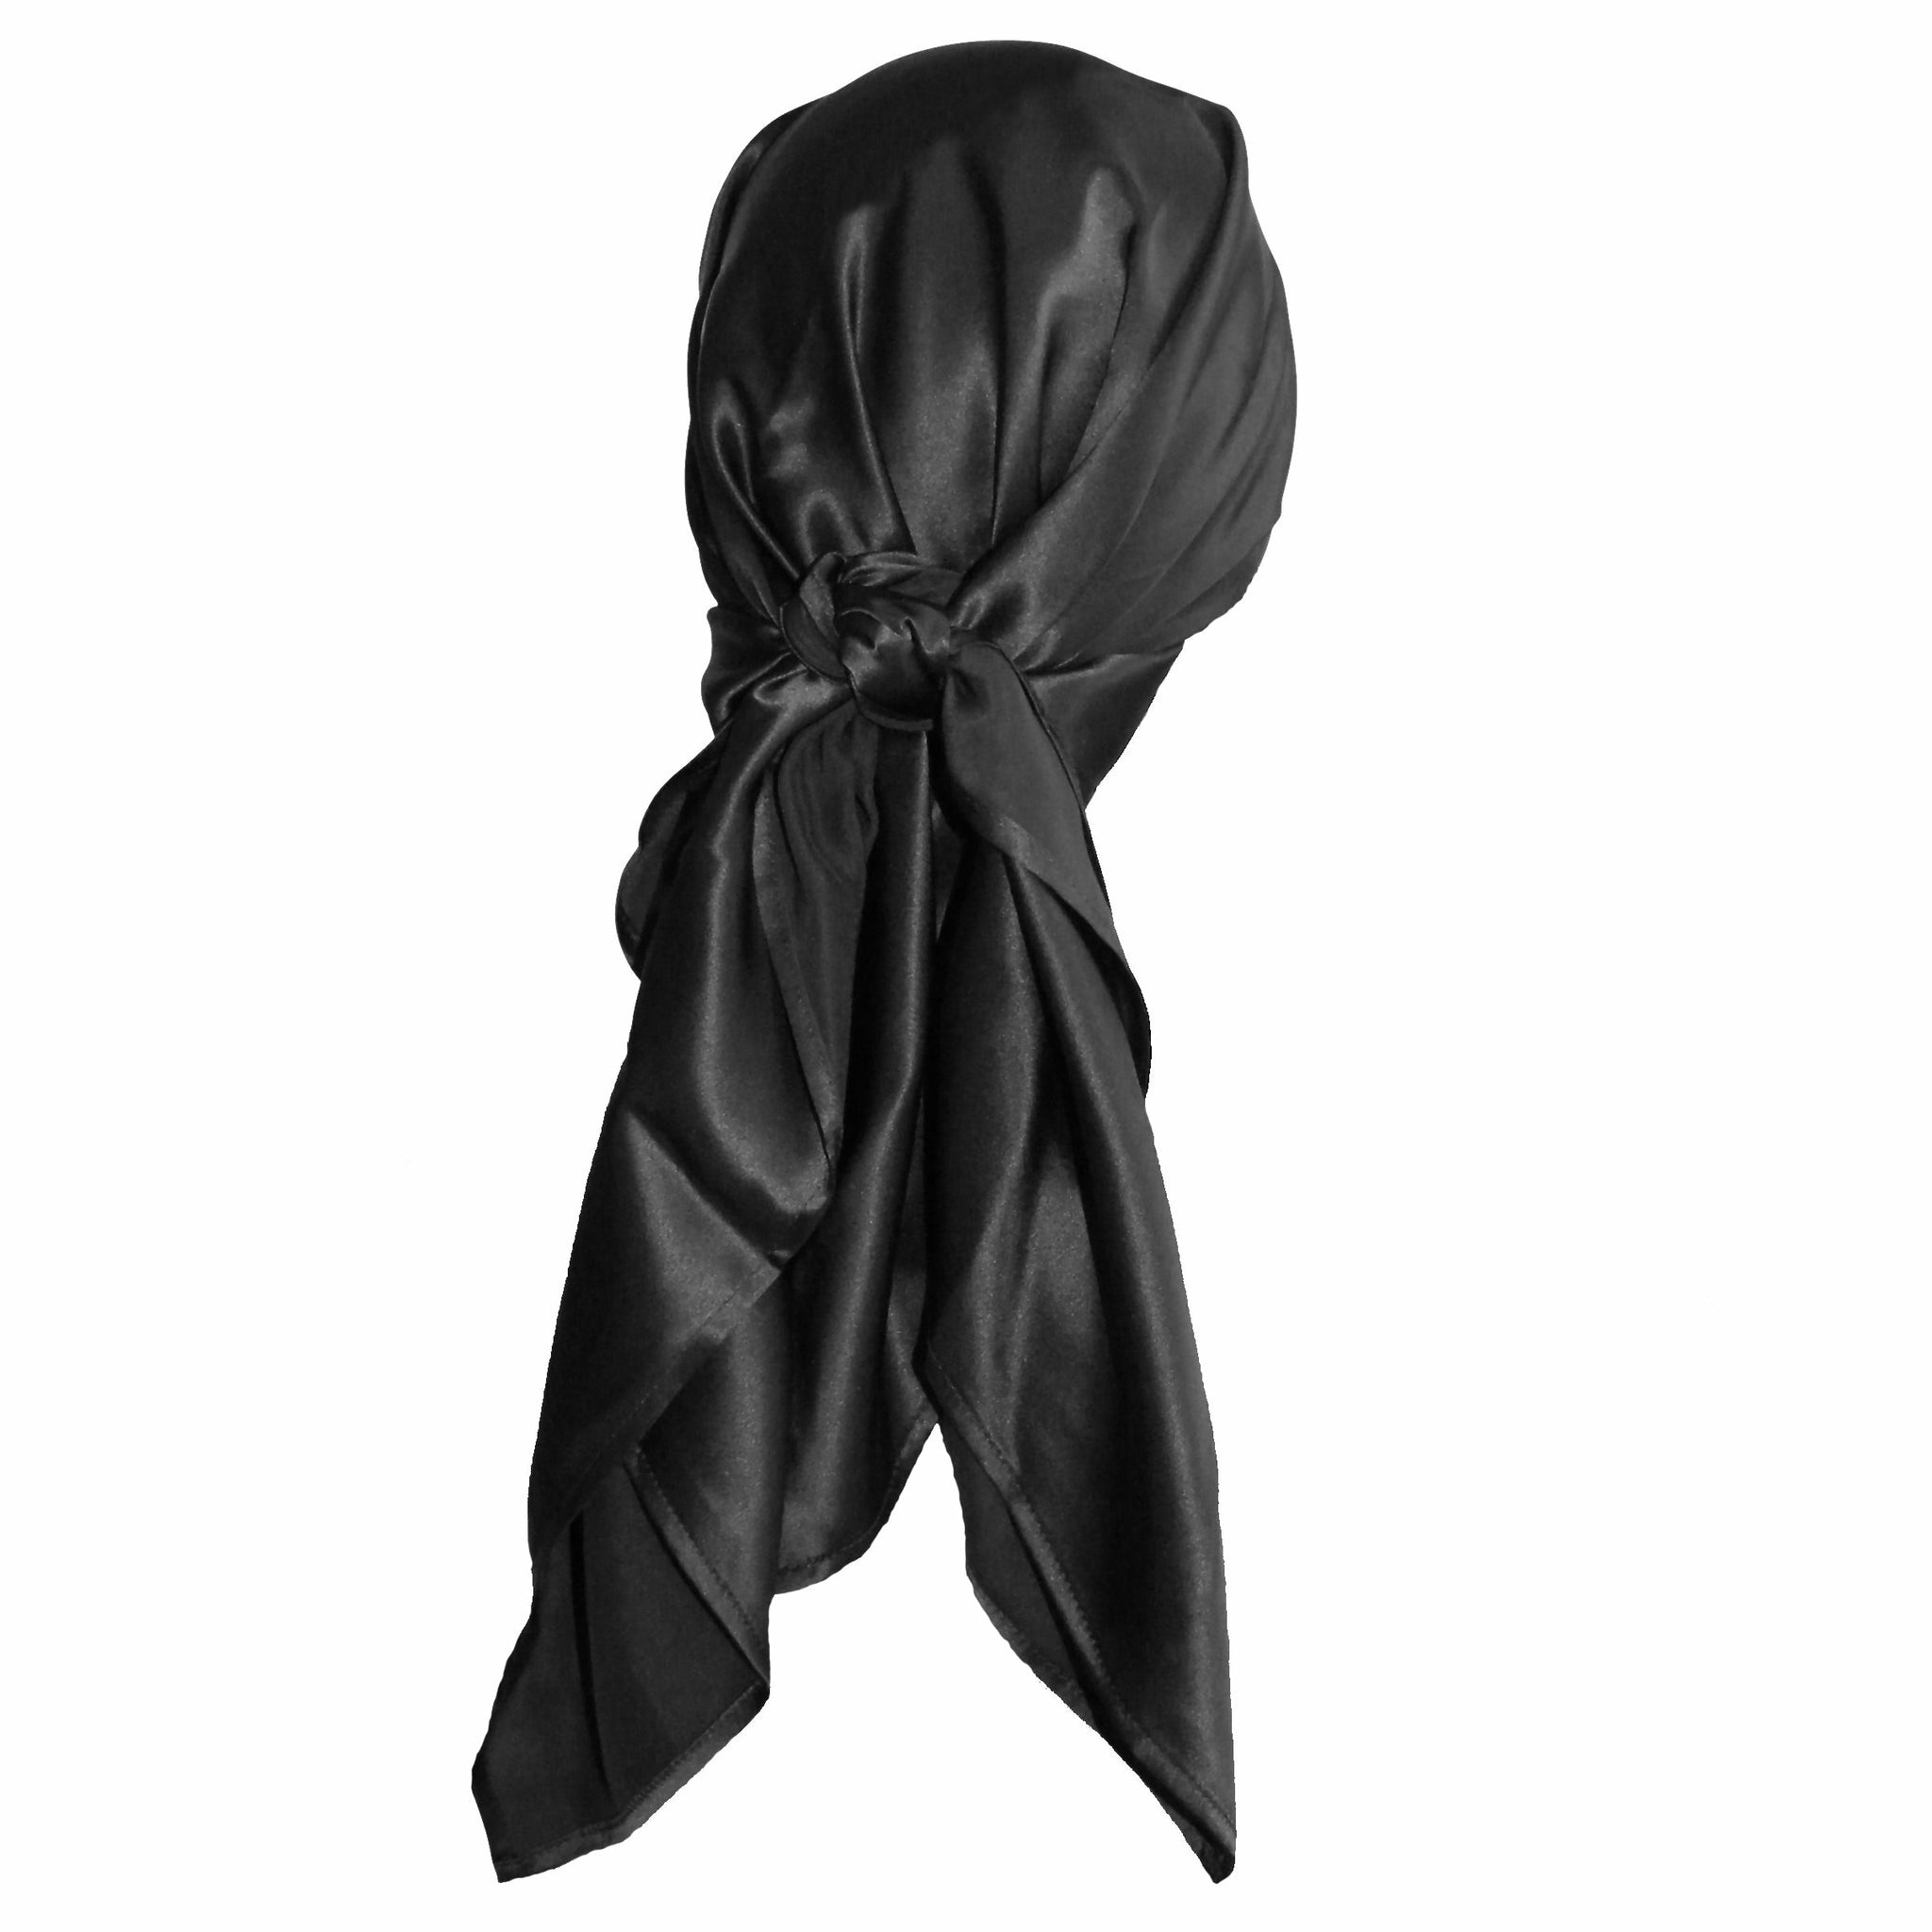 Long Pure Silk Head Scarf for Hair at Night